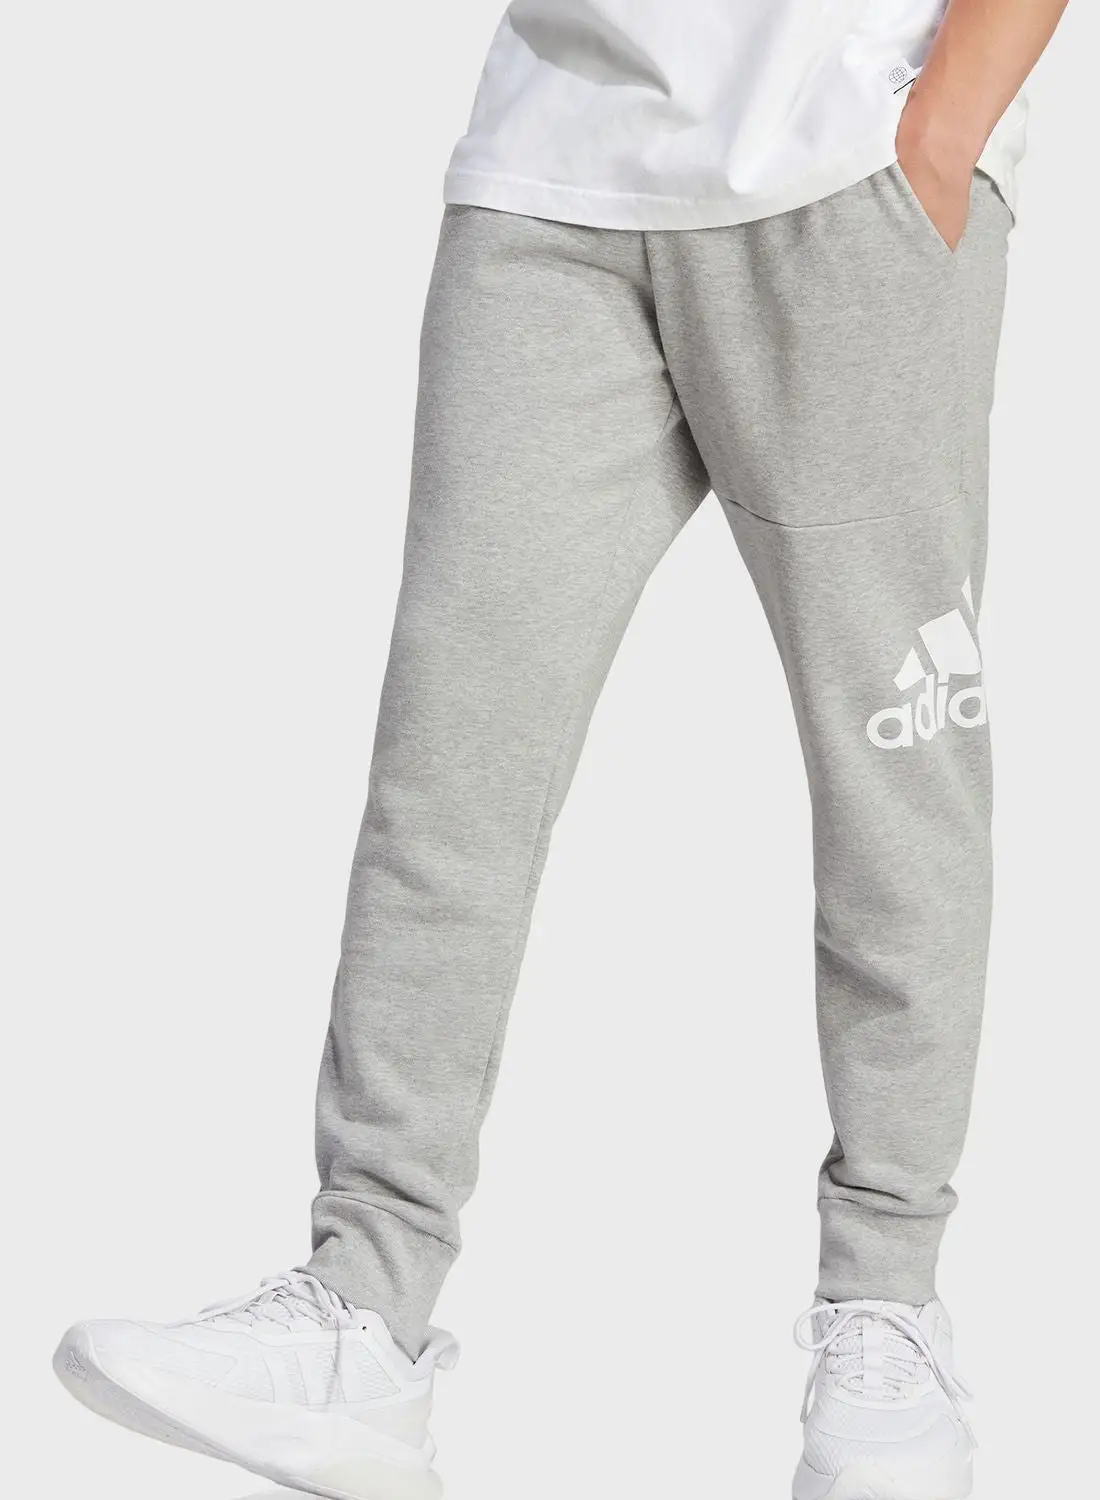 Adidas French Terry Sweatpants